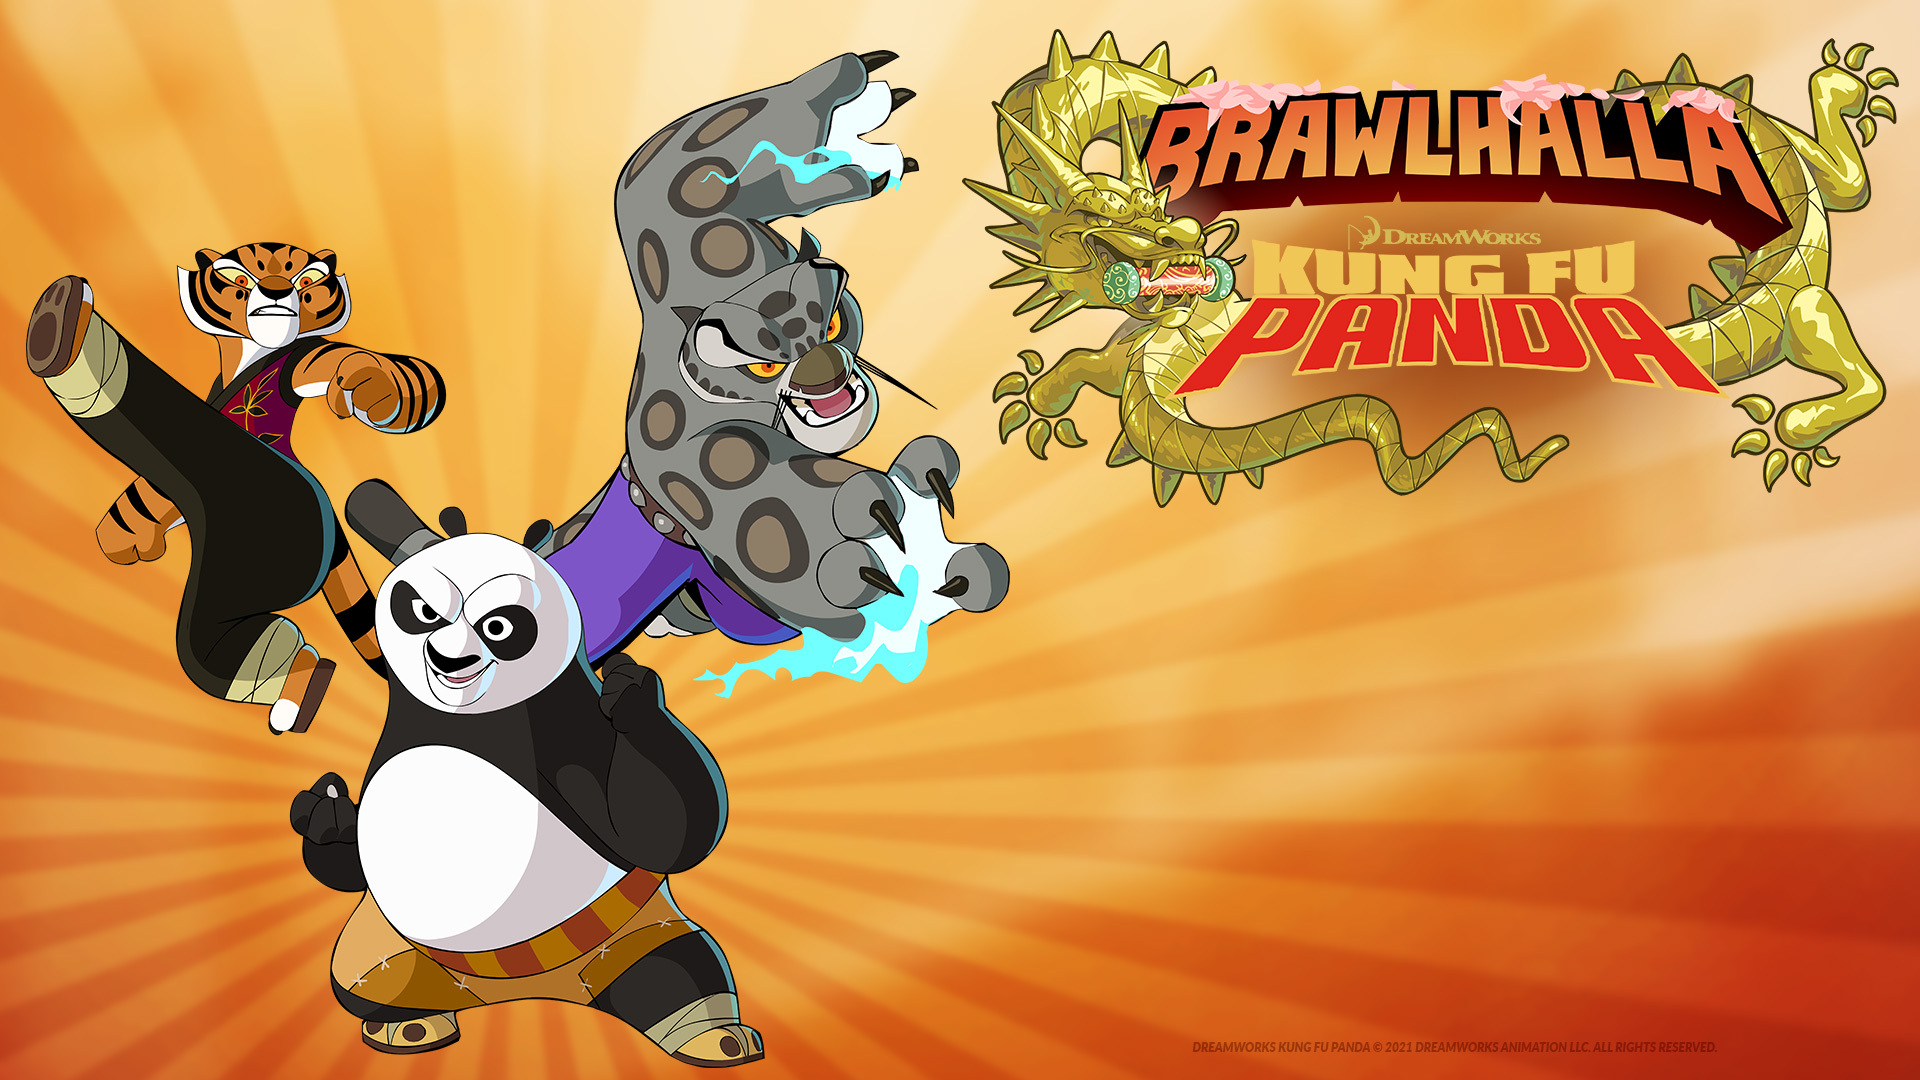 DreamWorks Animation’s Kung Fu Panda Warriors Join Brawlhalla As Epic Crossovers On March 24